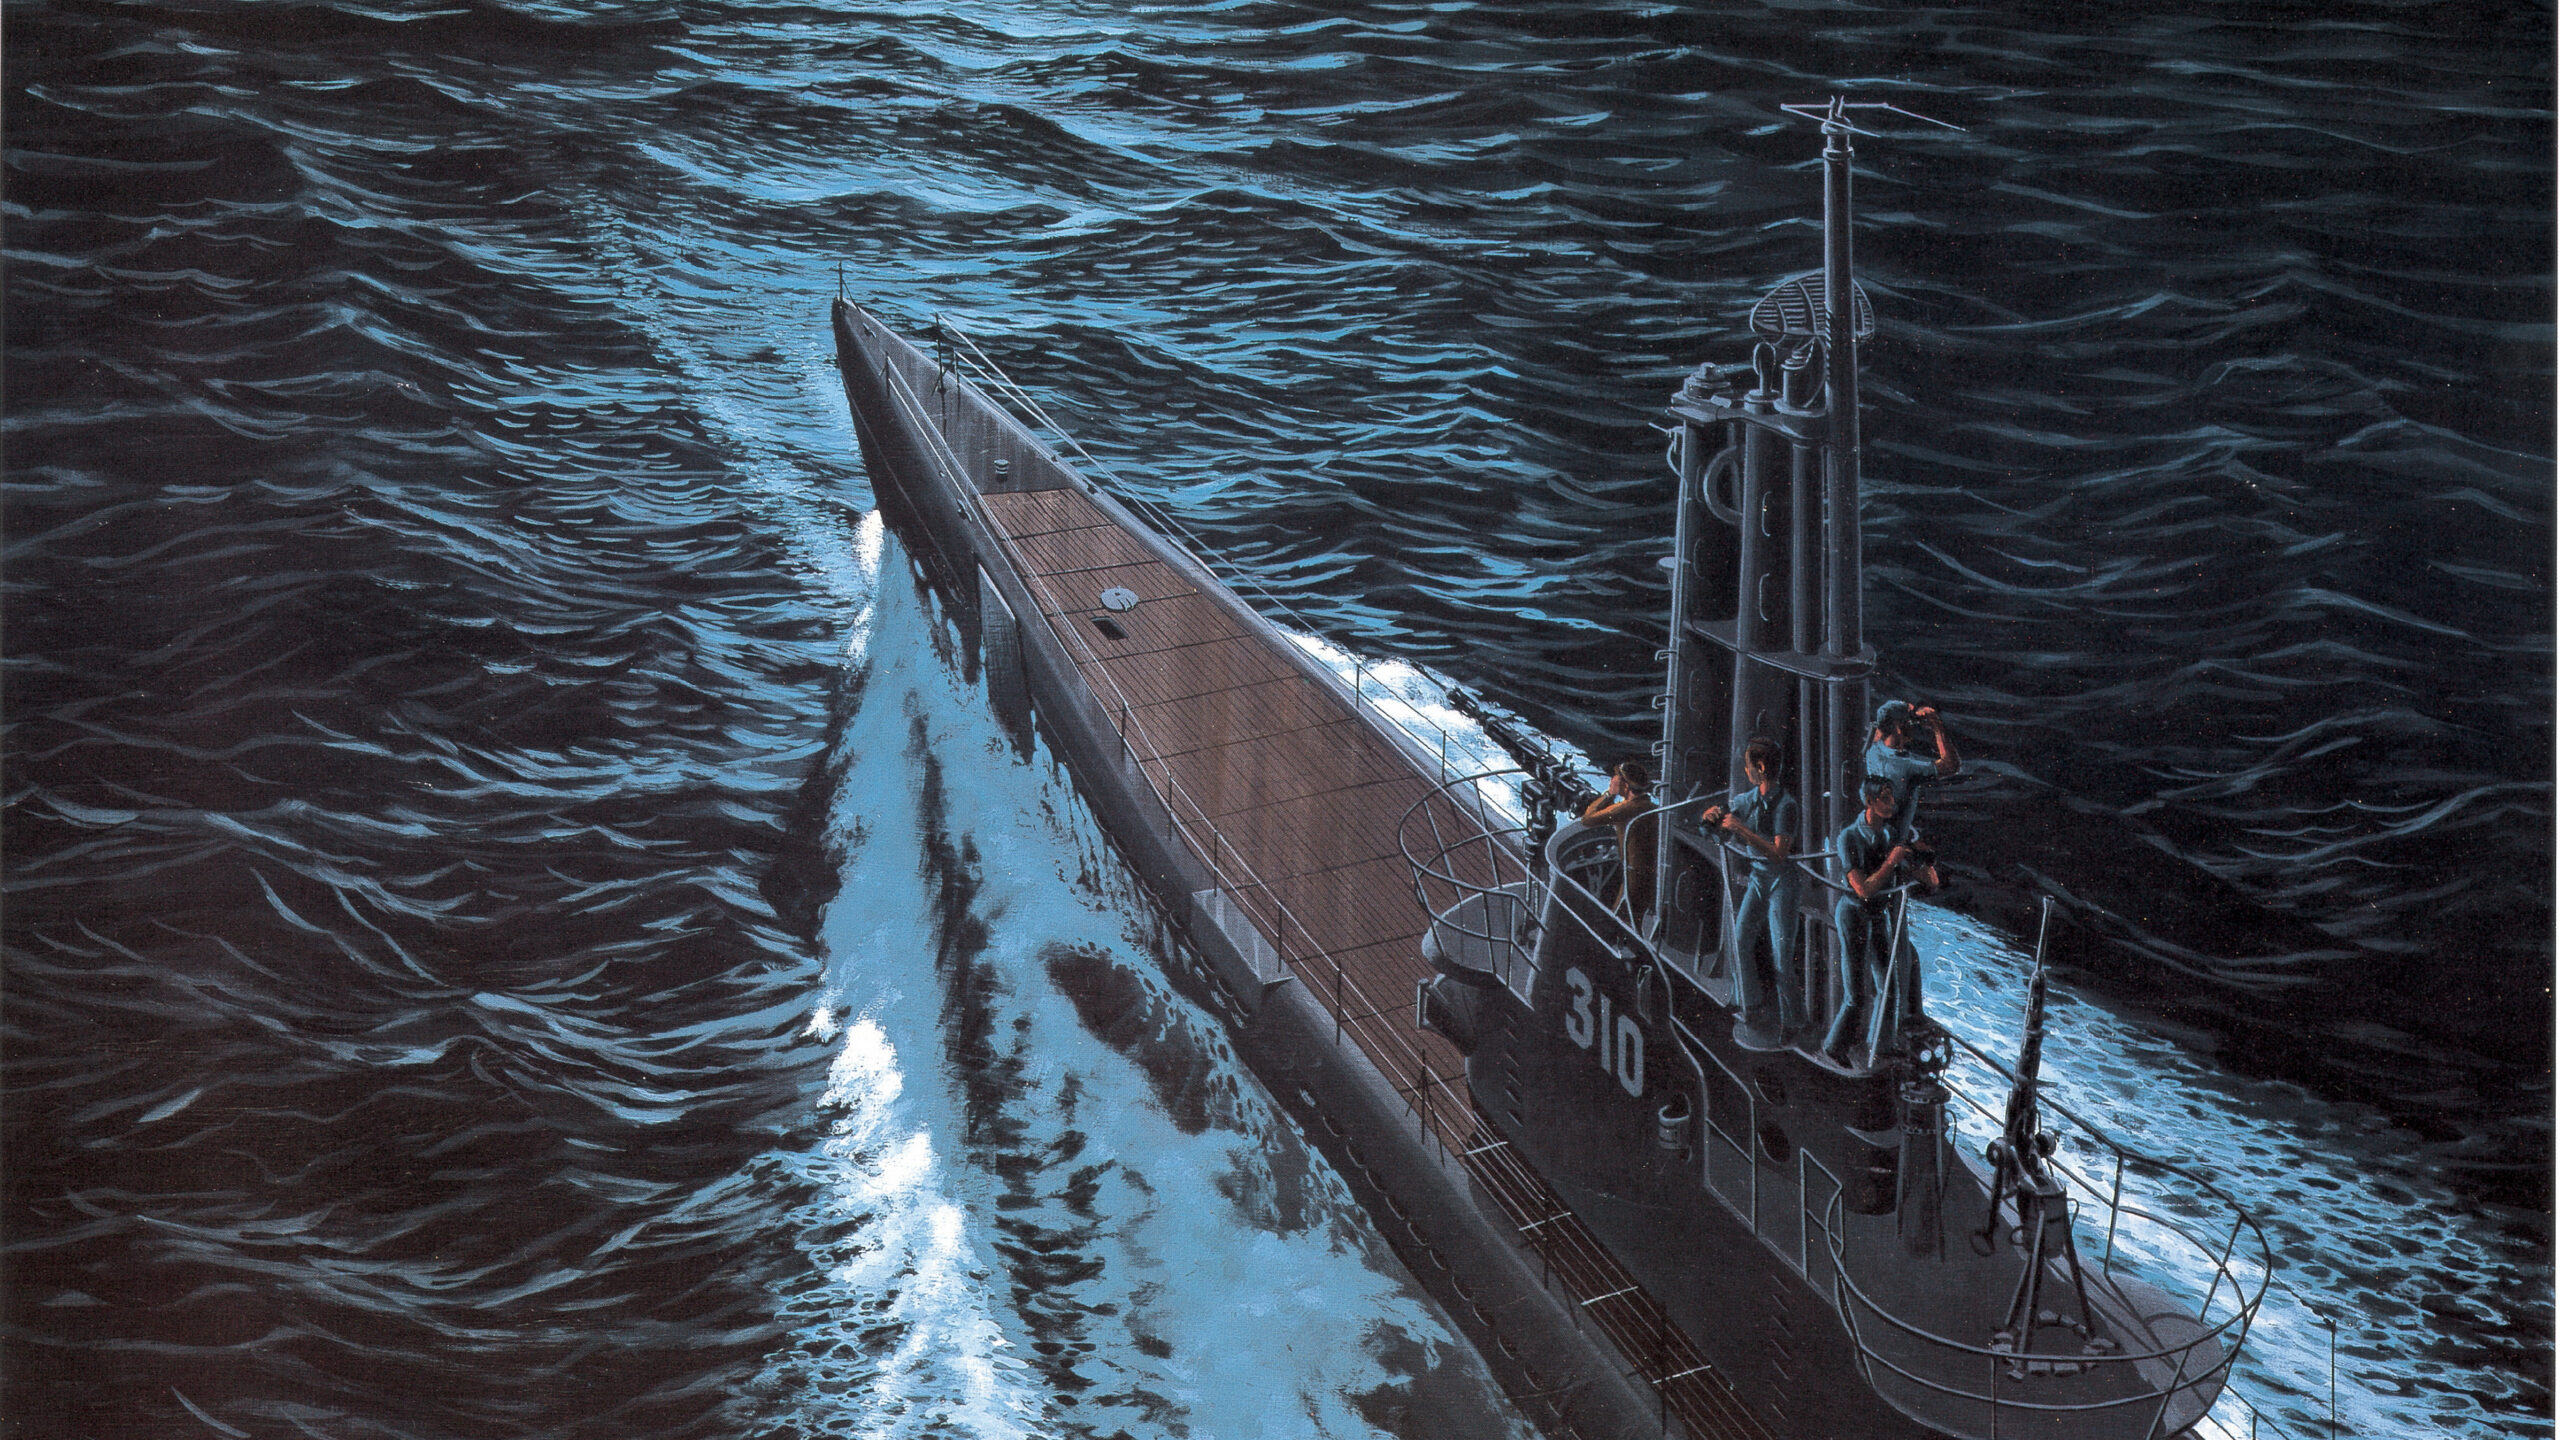 The amazing feat of sinking three Japanese submarines is commemorated in this painting by artist Alfred Johnson titled “Batfish Gets a Hat Trick.”